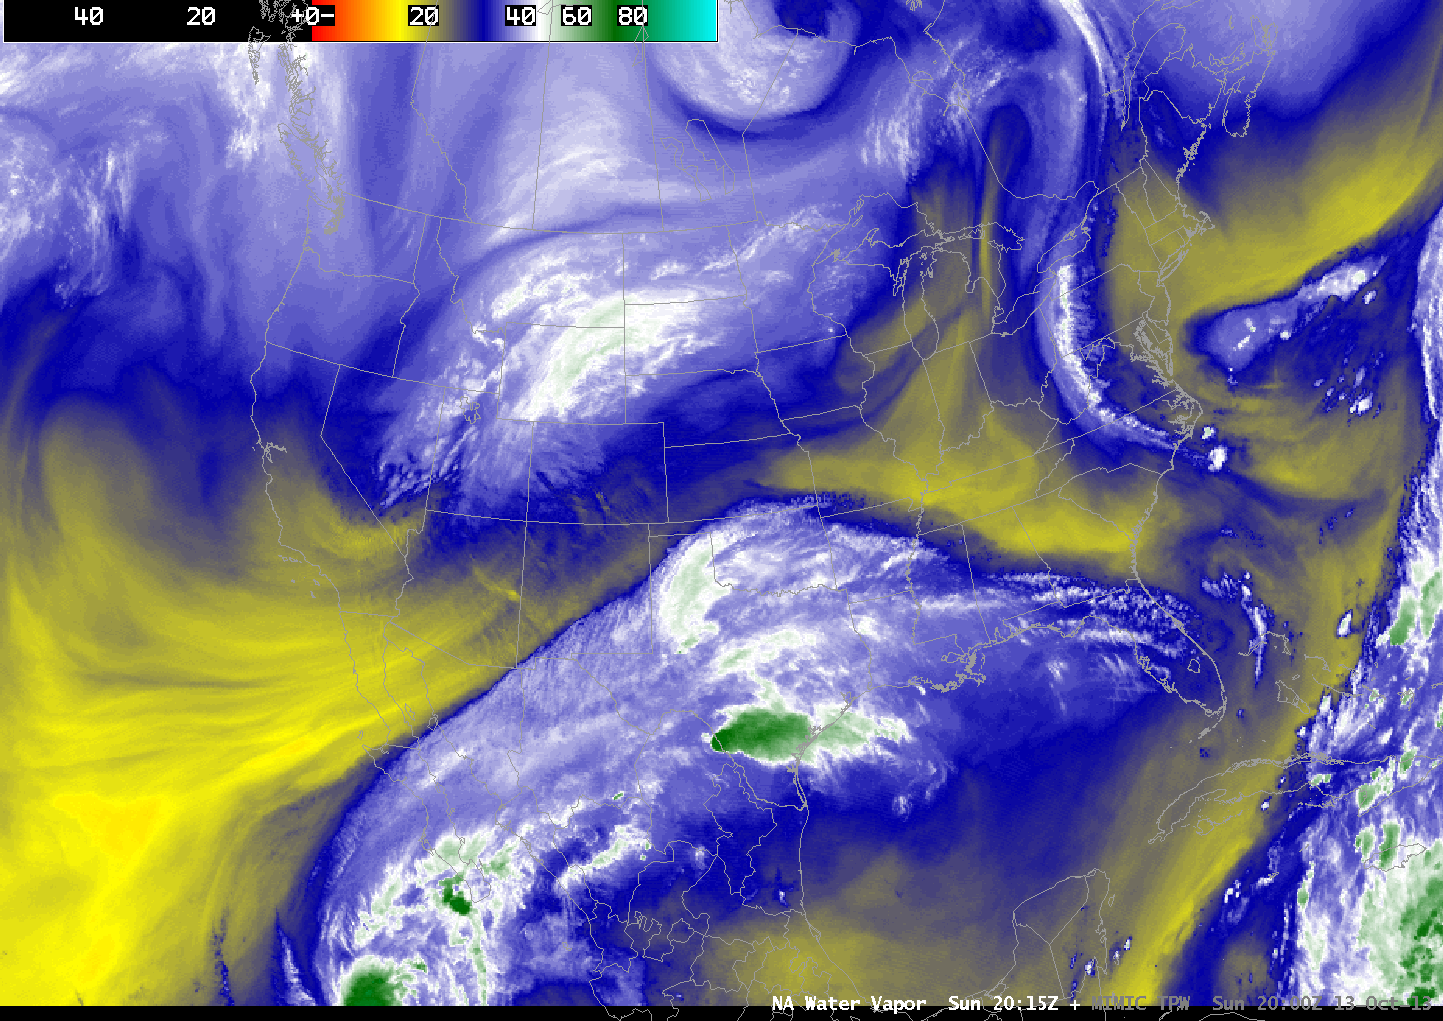 GOES-15/GOES-13 6.5 Âµm water vapor channel images (click to play animation)